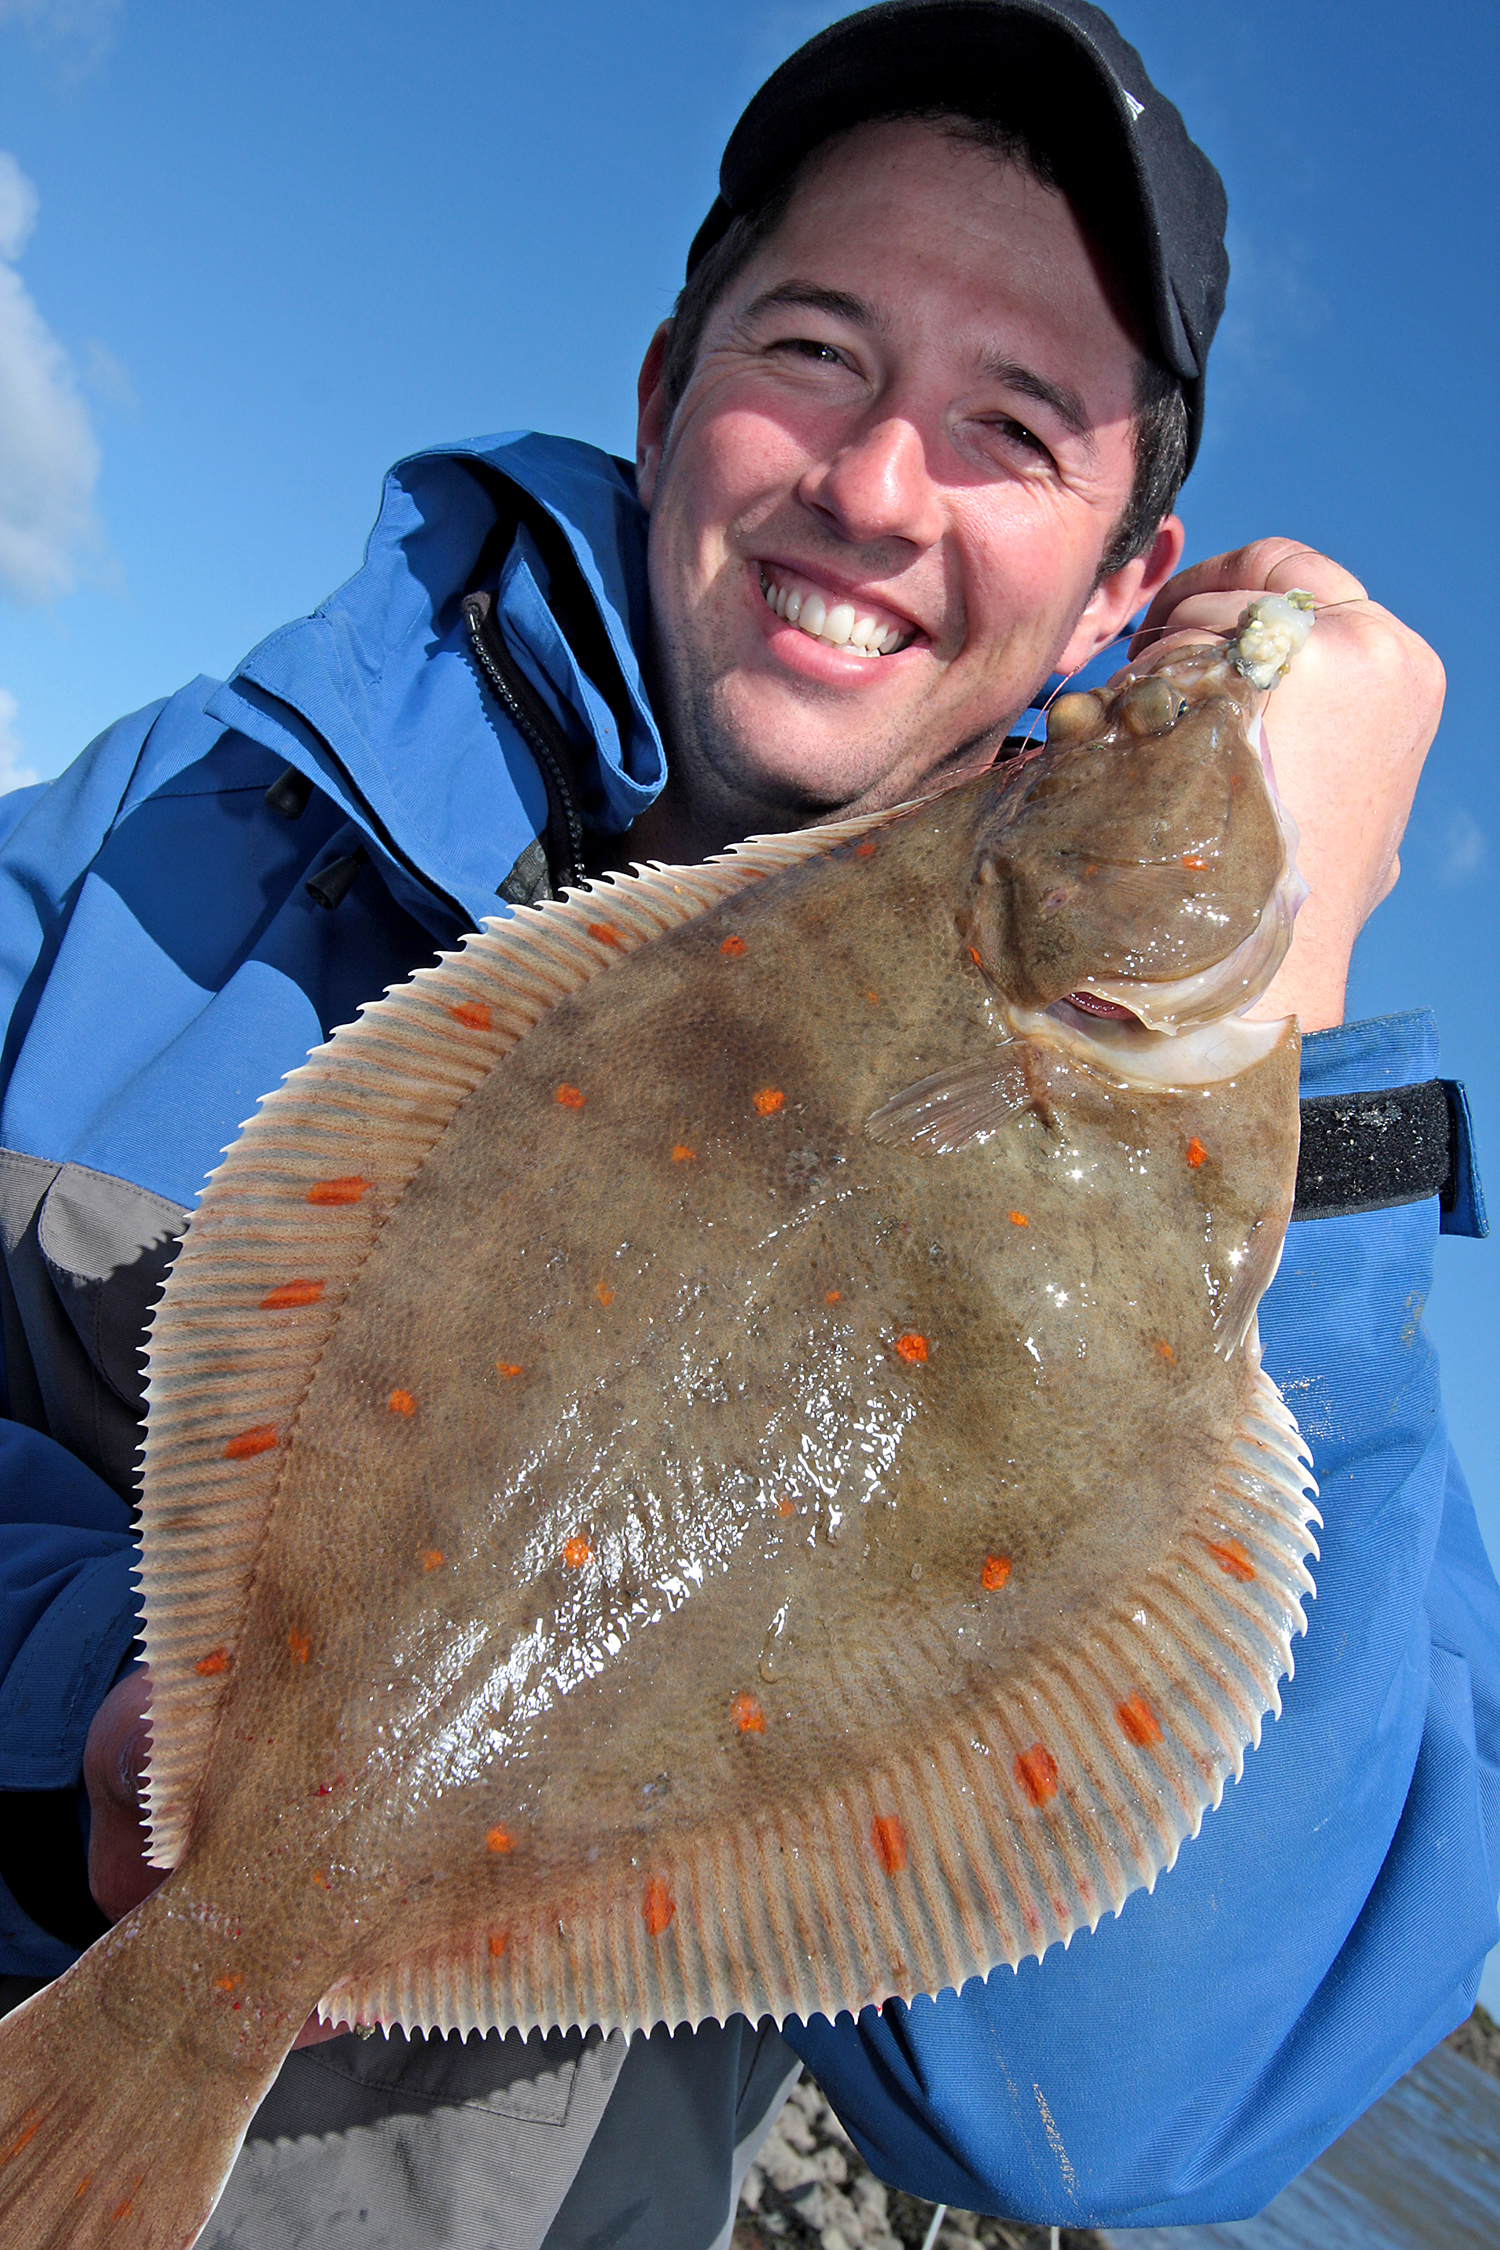 How to catch flatfish from the shore - SeaAngler